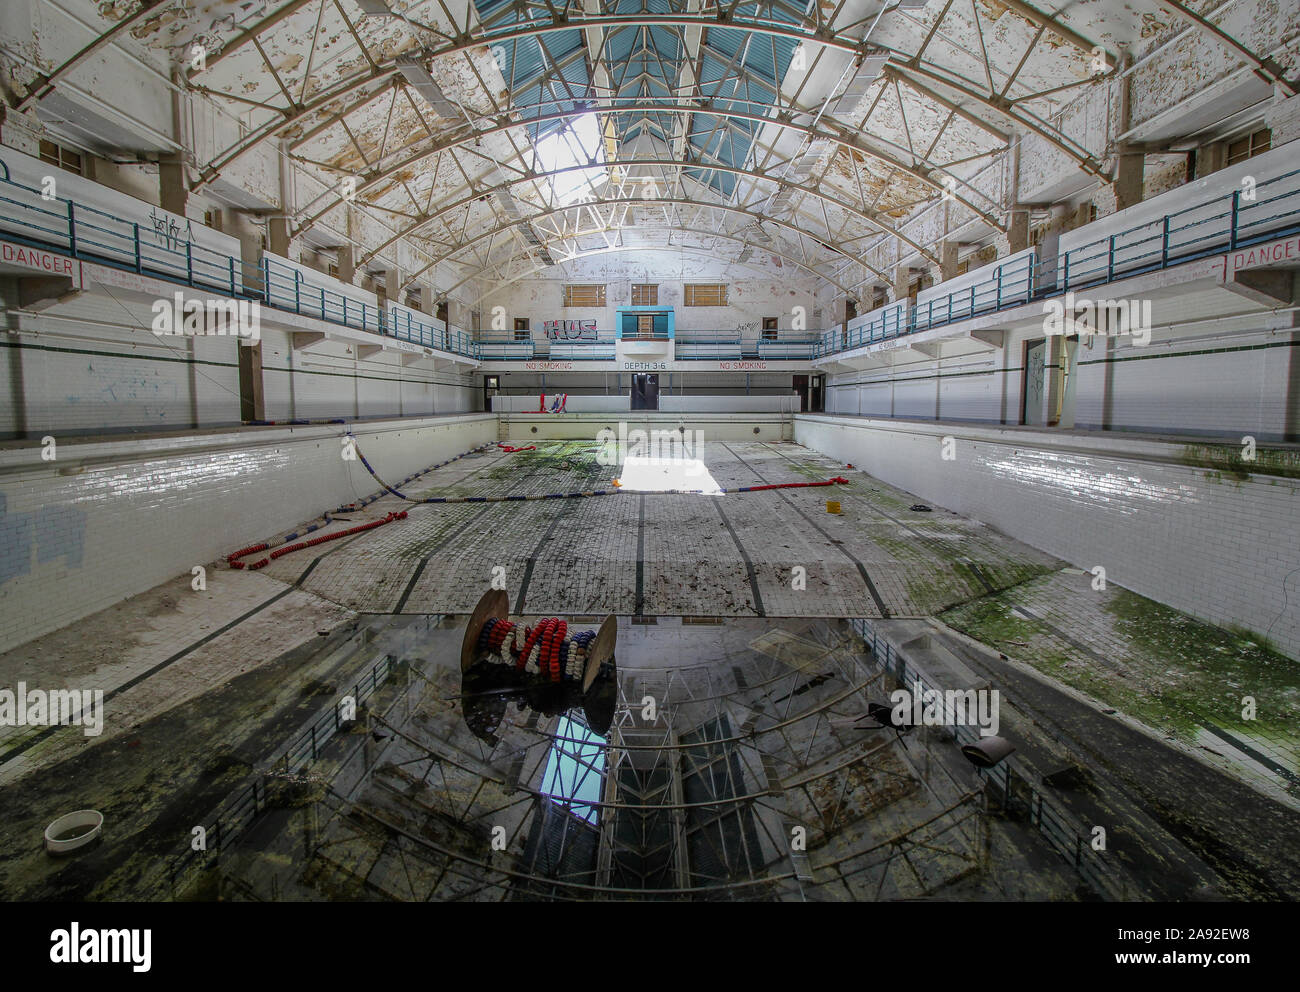 Full Shot of Abandoned Indoor Swimming Pool with Graffiti, Vandalism and Dirty Pool Water - Suffolk UK Stock Photo